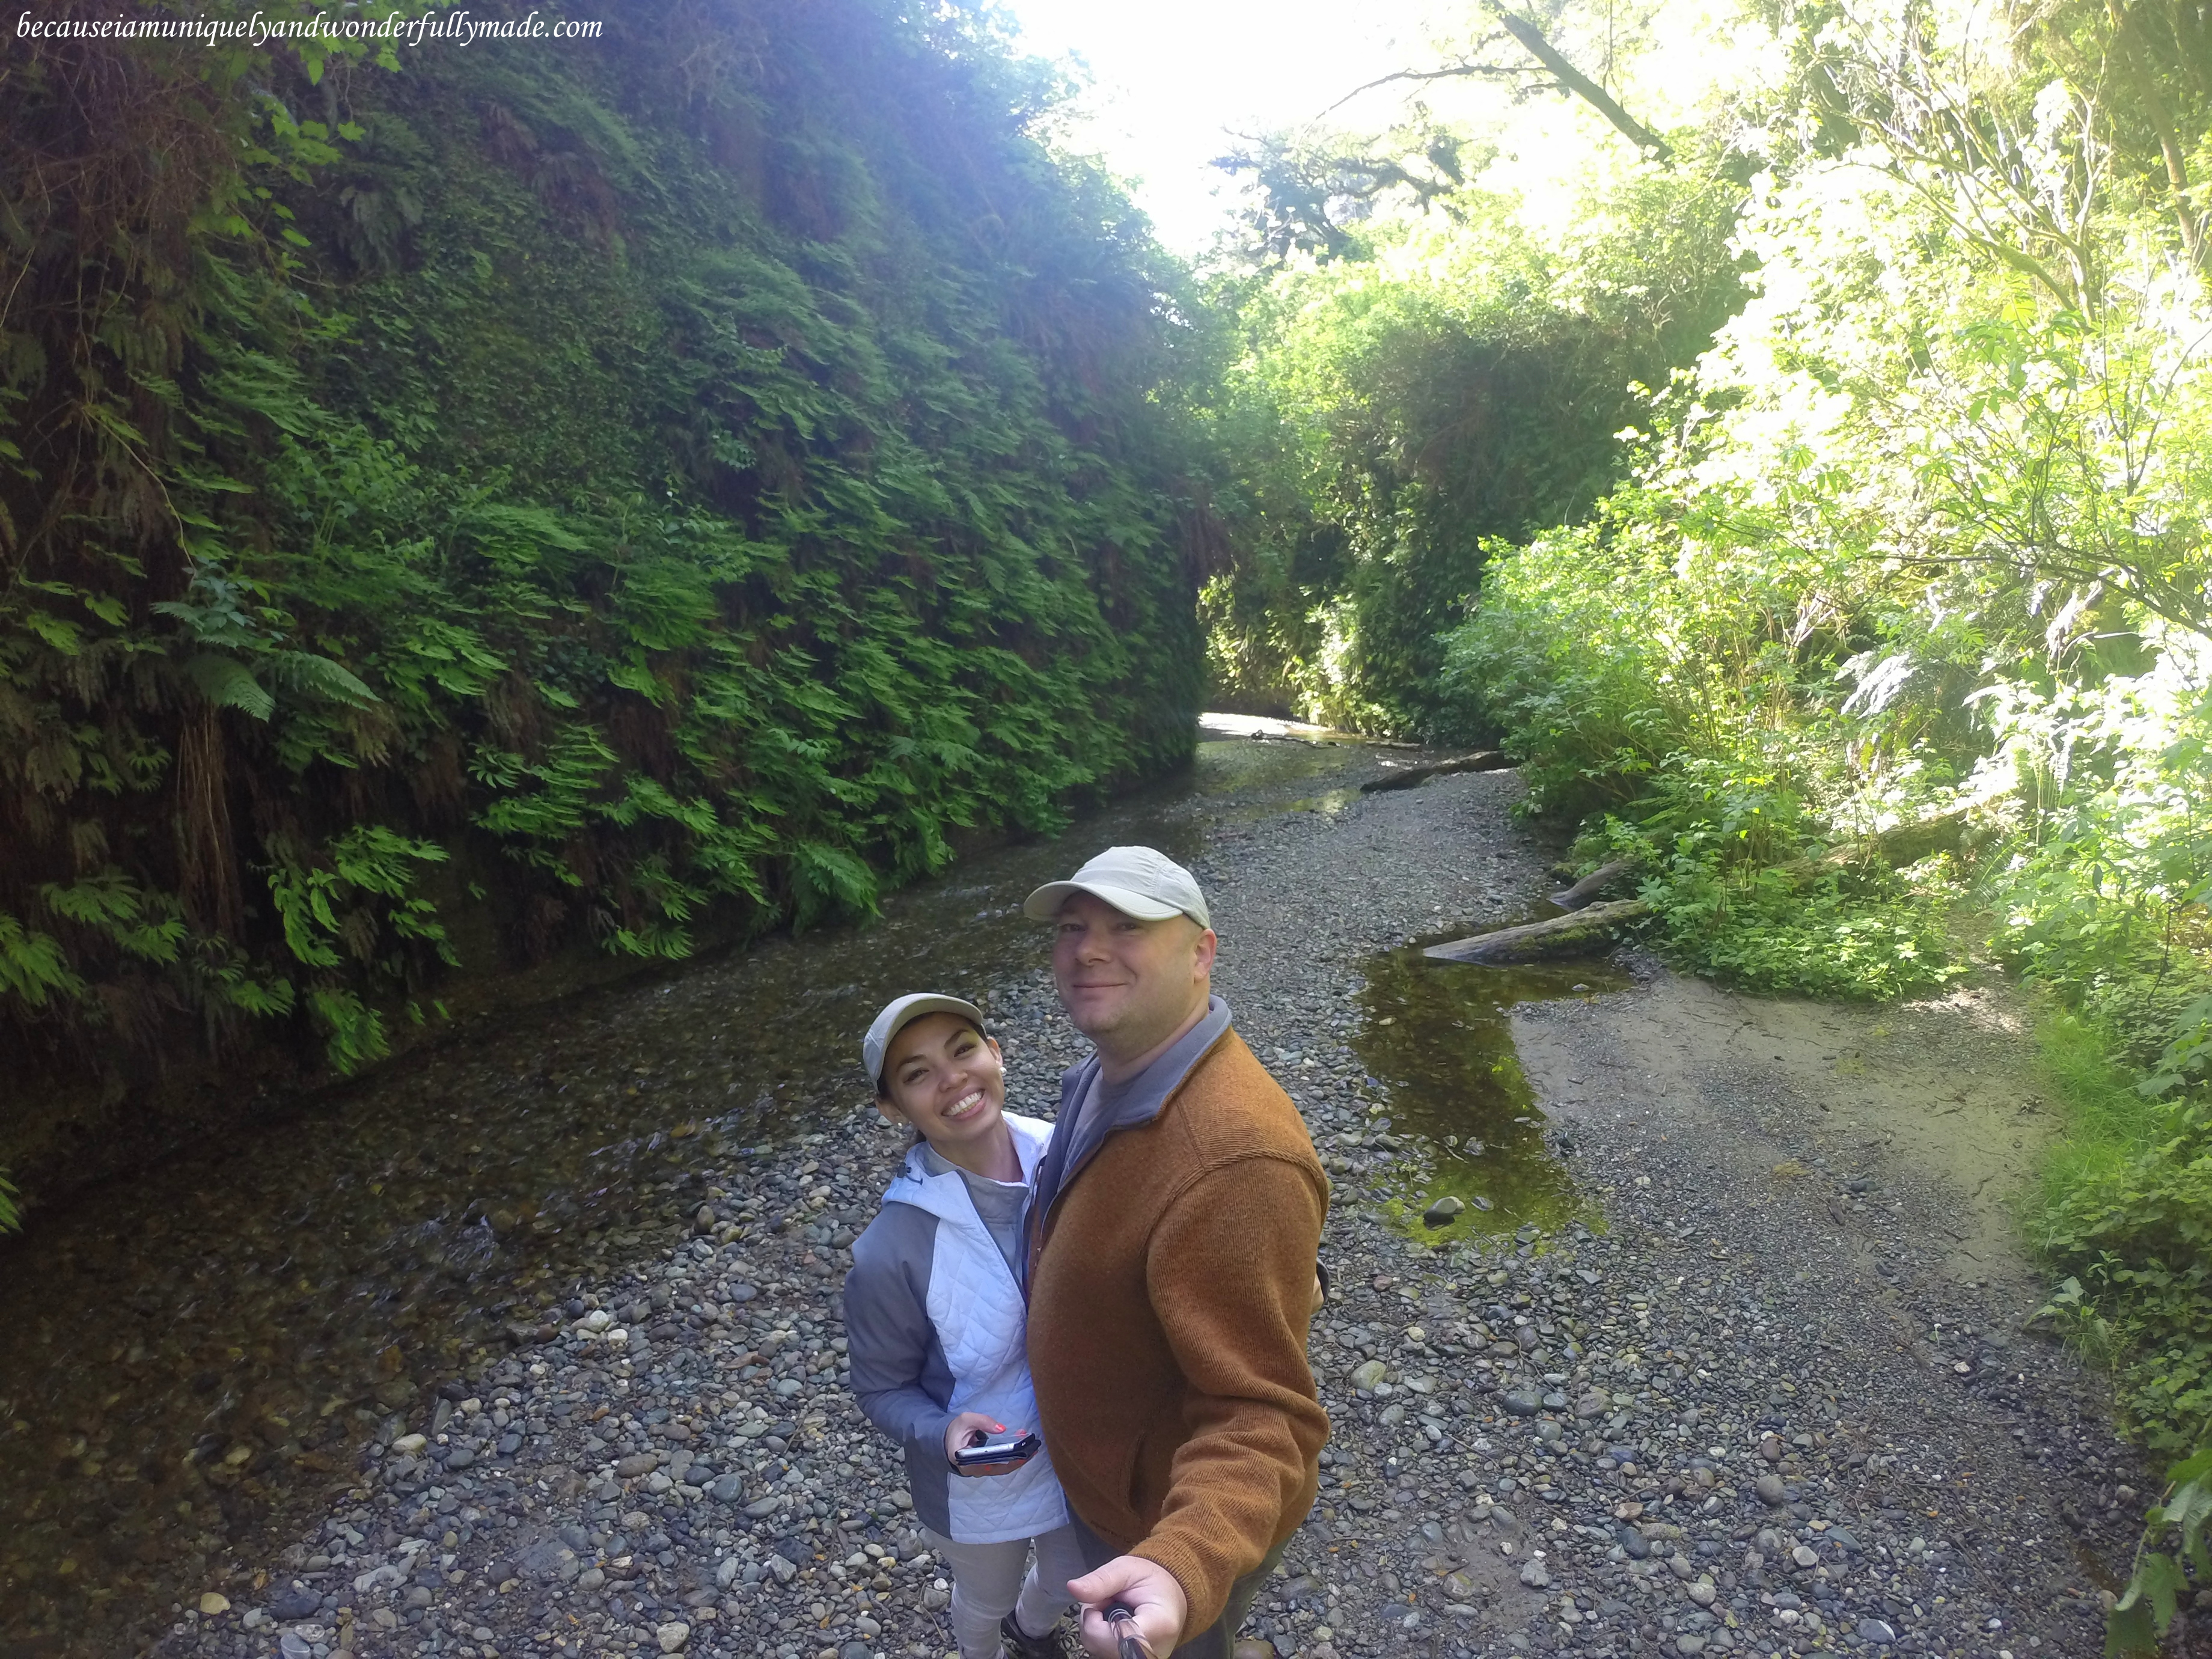 Last photo before we left Fern Canyon in Redwood National and State Parks in California.